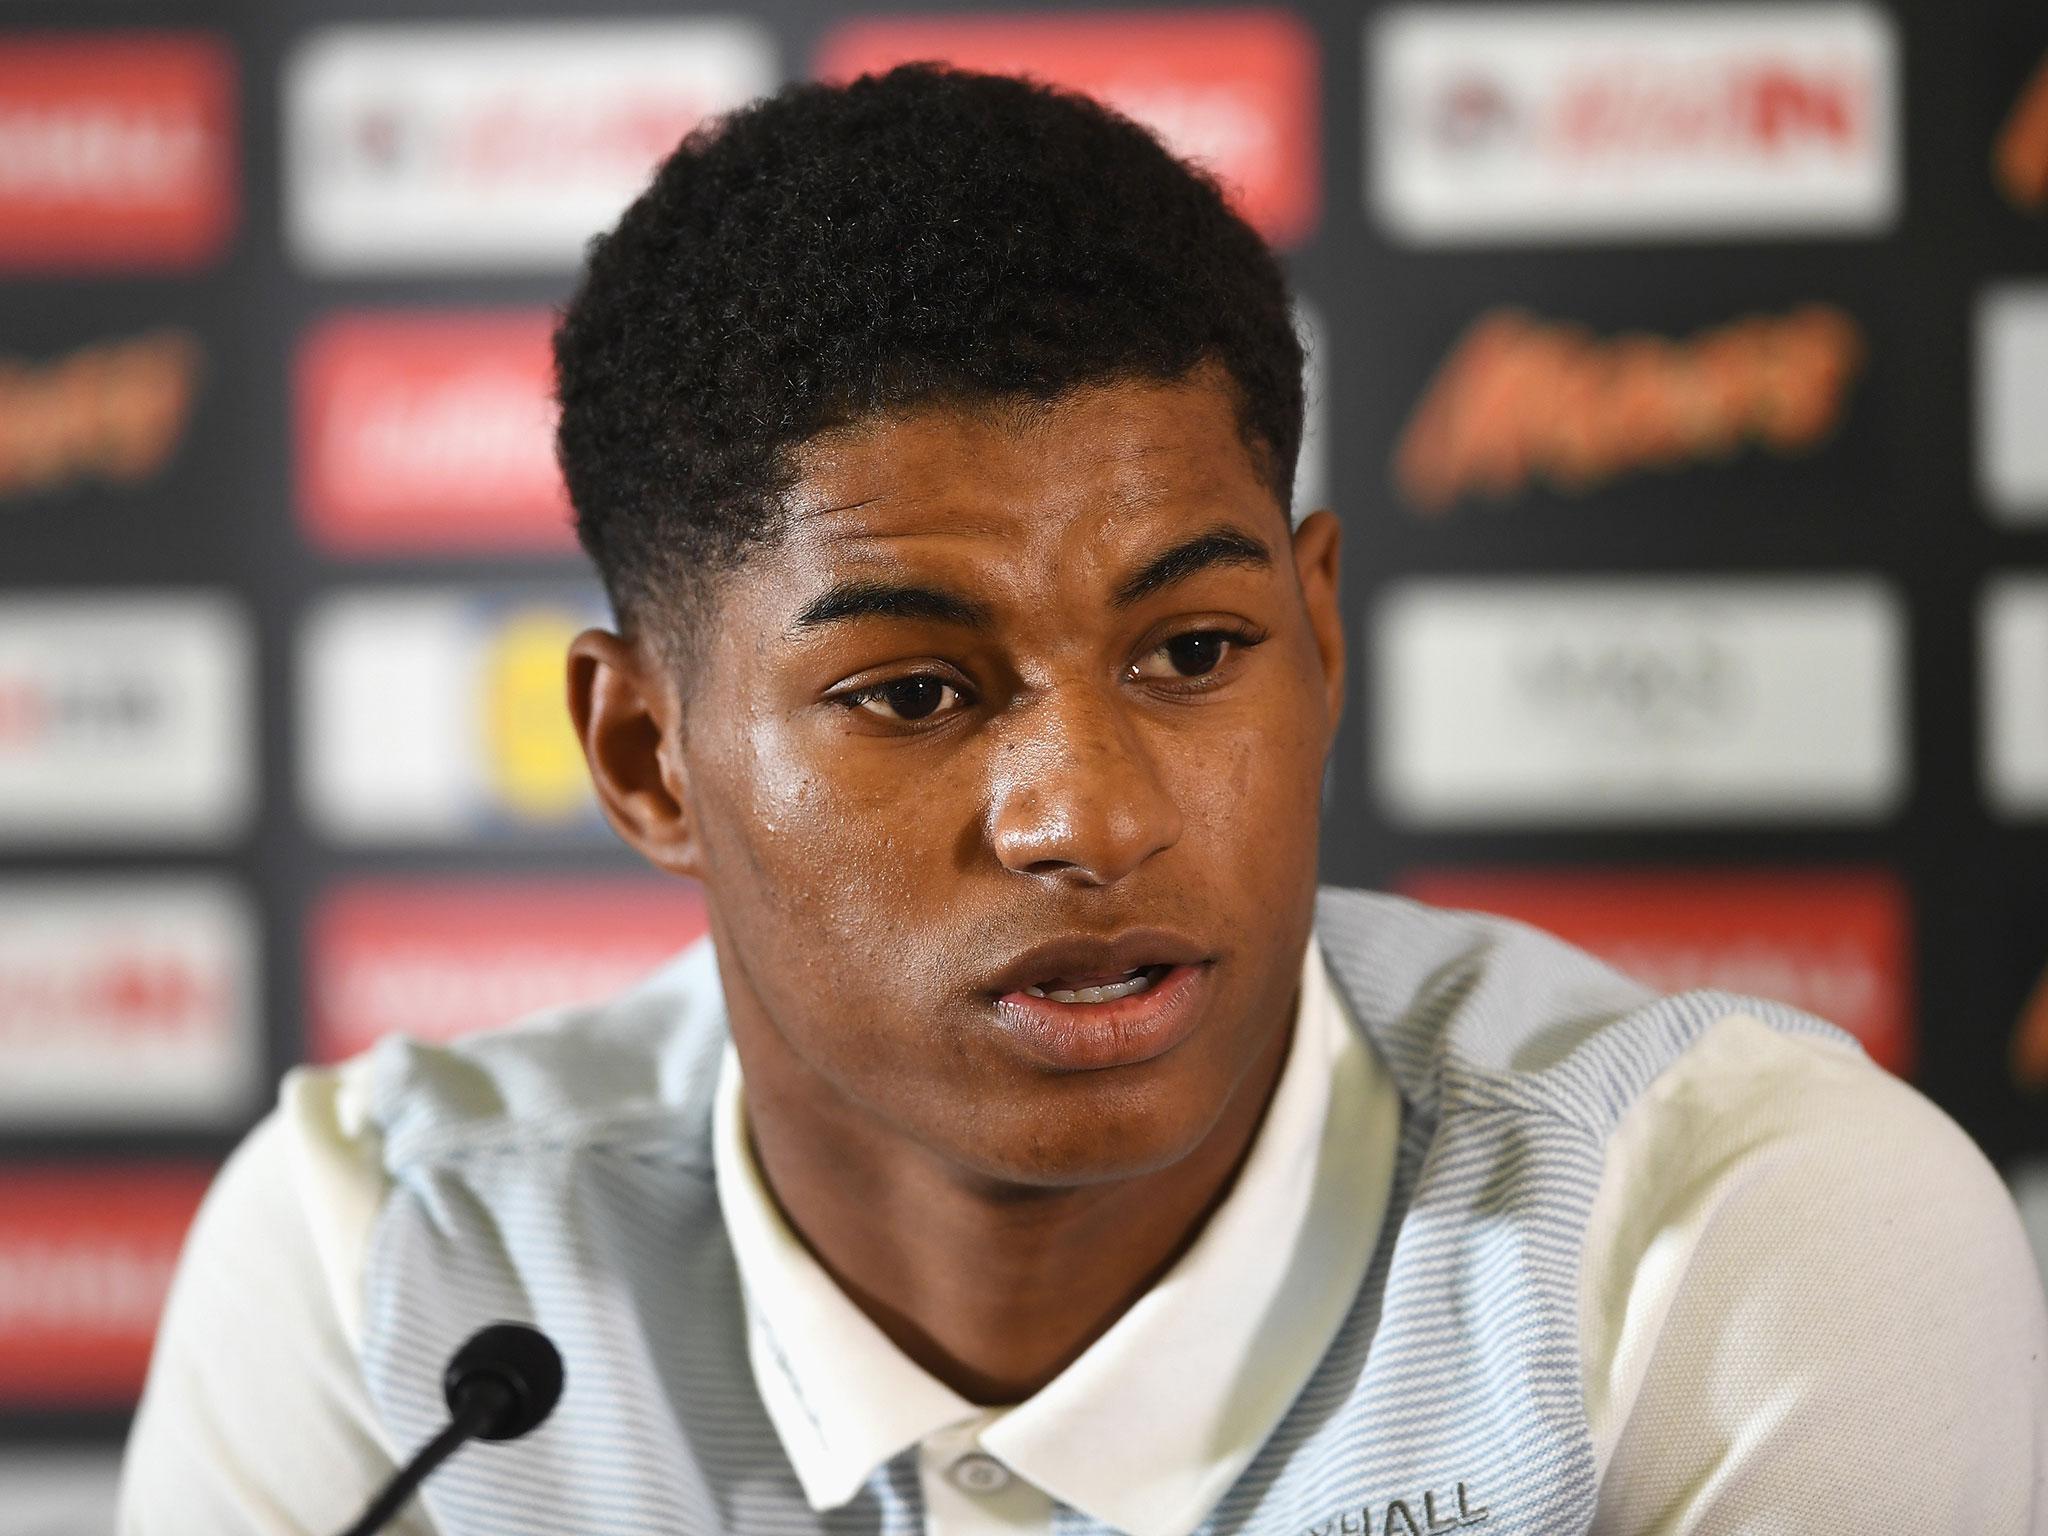 Marcus Rashford wants to be the main man for Manchester United and England